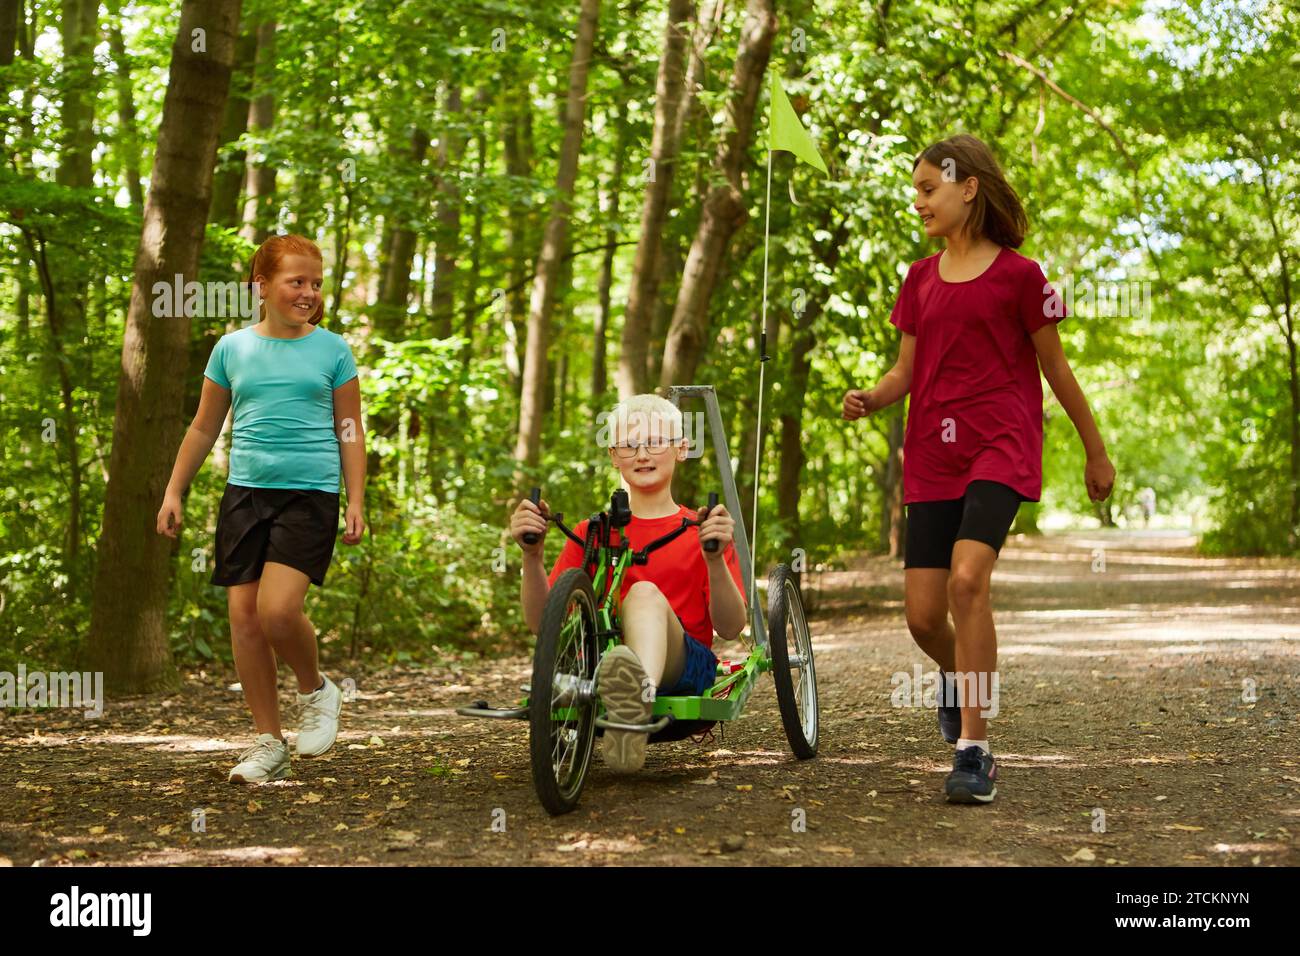 Boy riding recumbent bike with female friends walking on footpath at park Stock Photo